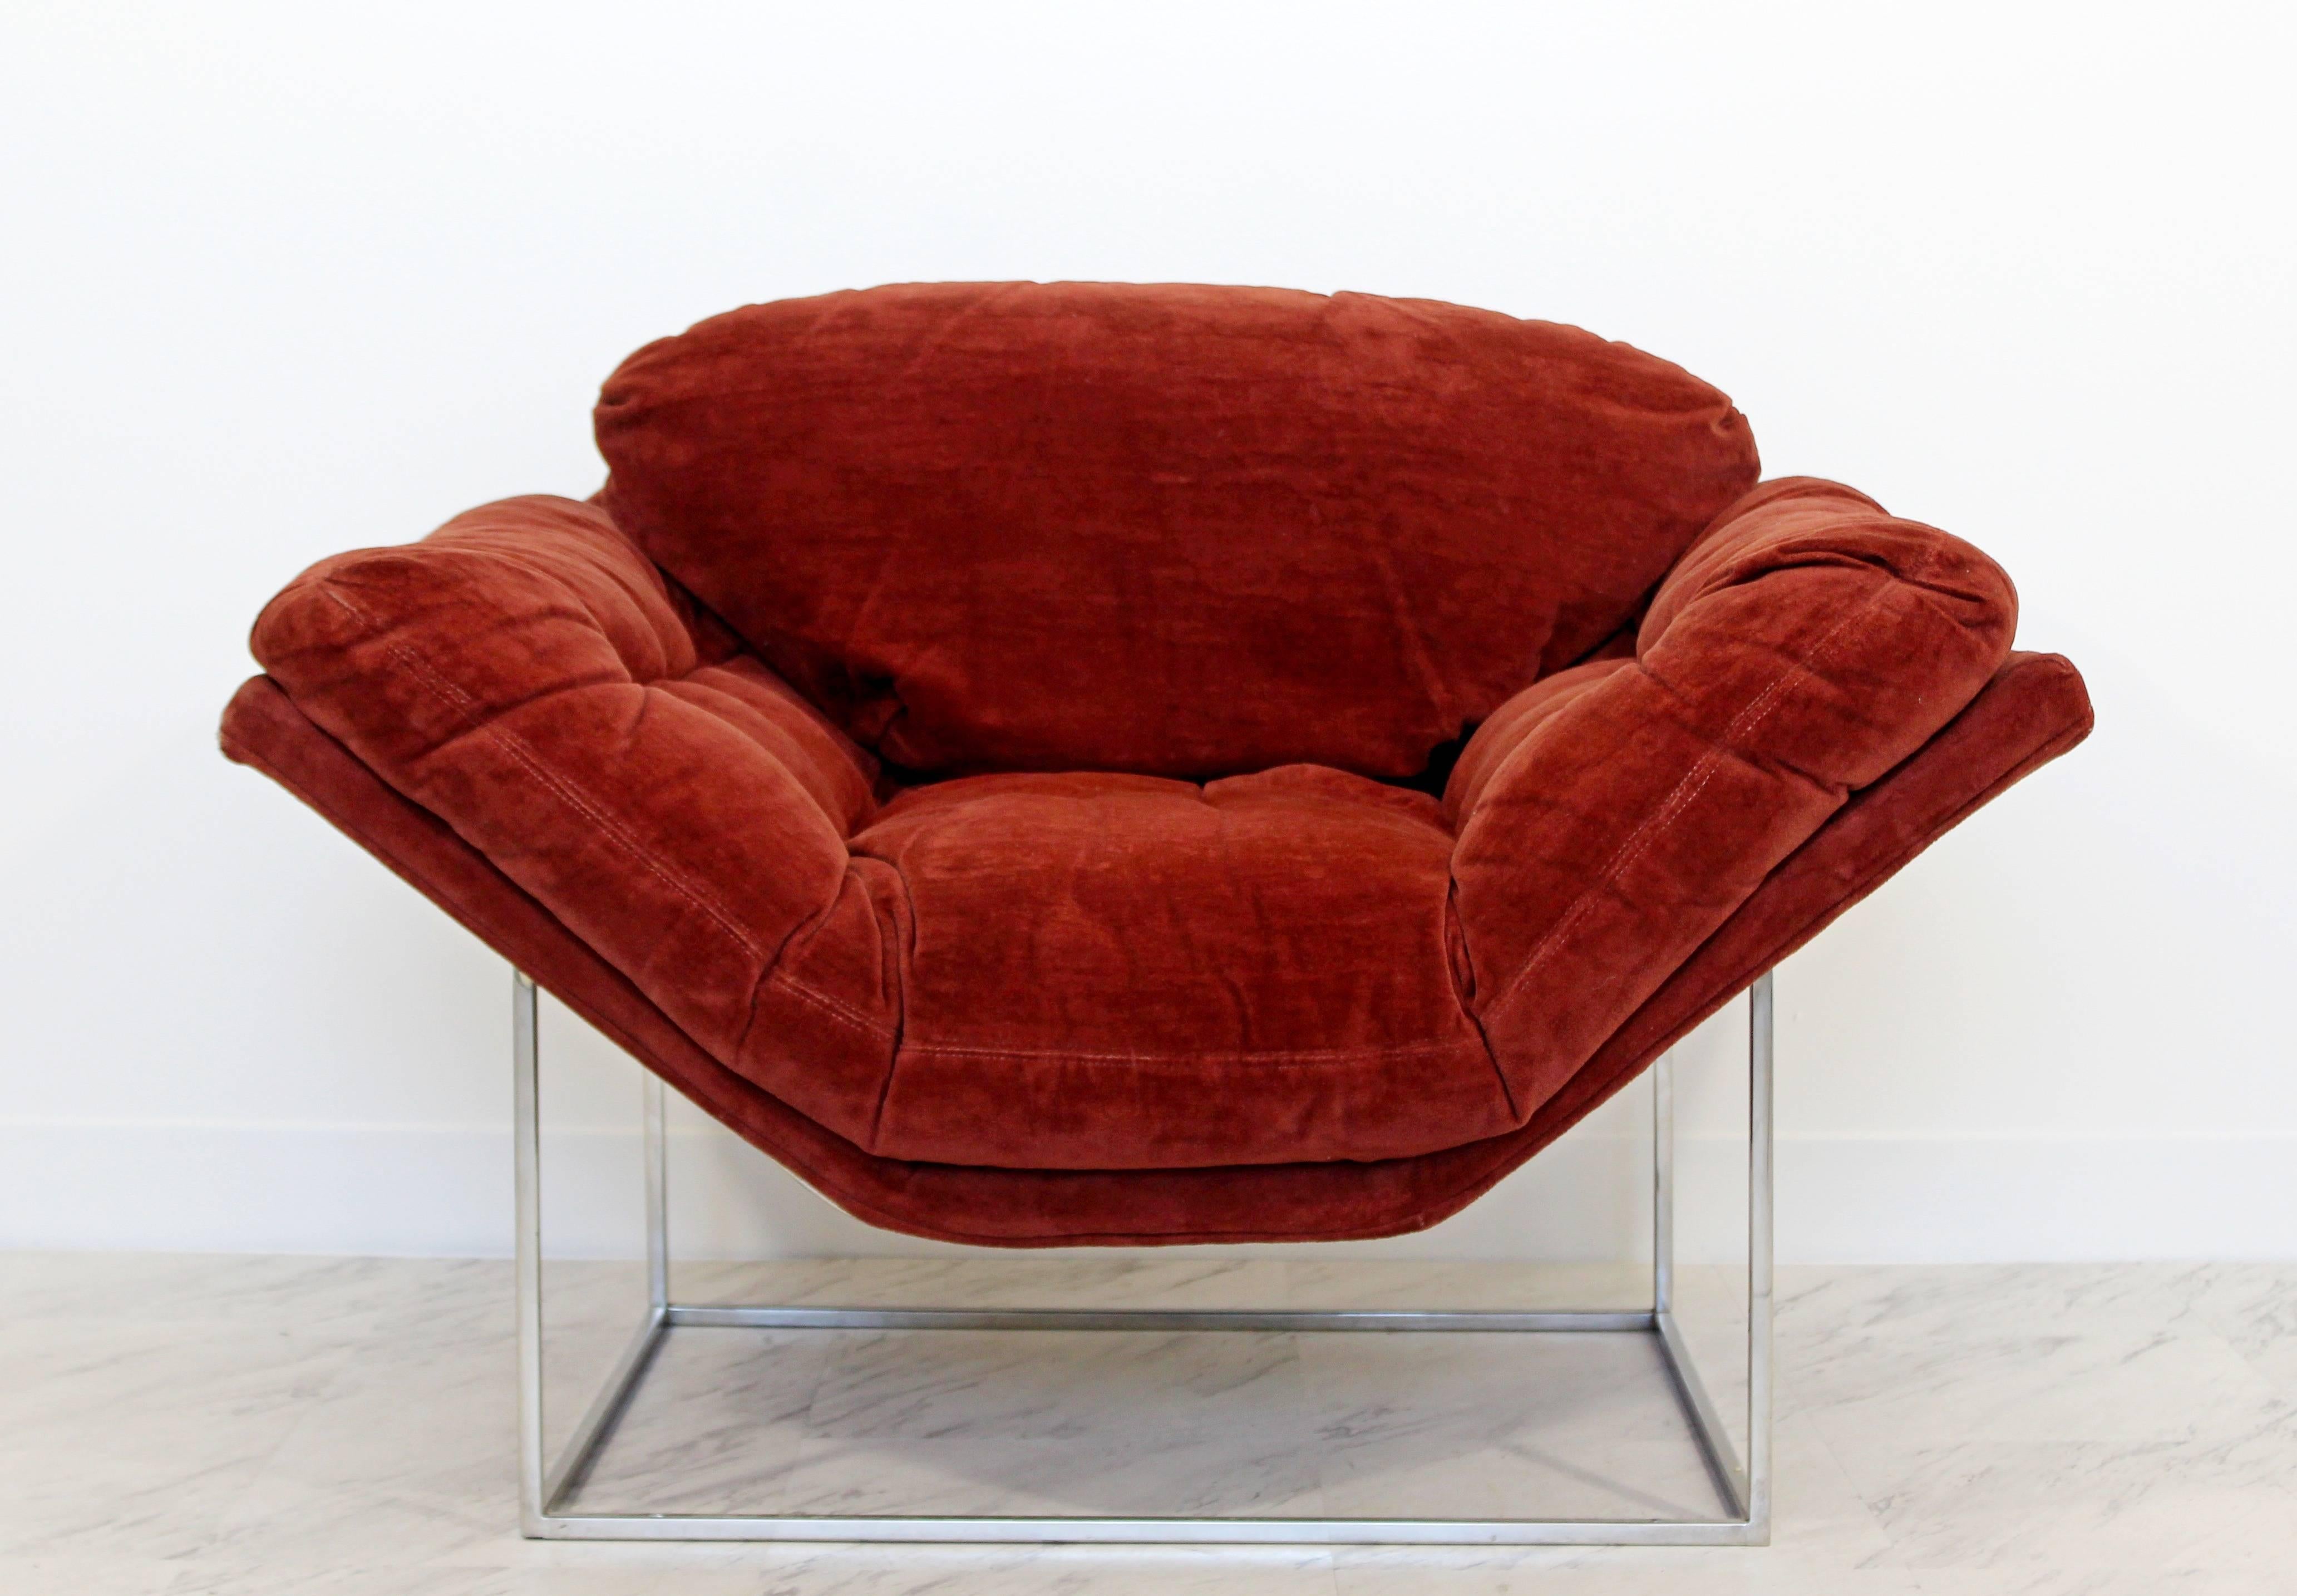 For your consideration is an incredible and rare lounge chair, with a burgundy fabric, practically floating on a thin tubular chrome base by Milo Baughman for Thayer Coggin, circa the 1960s. In excellent condition, but with a couple minor tears in